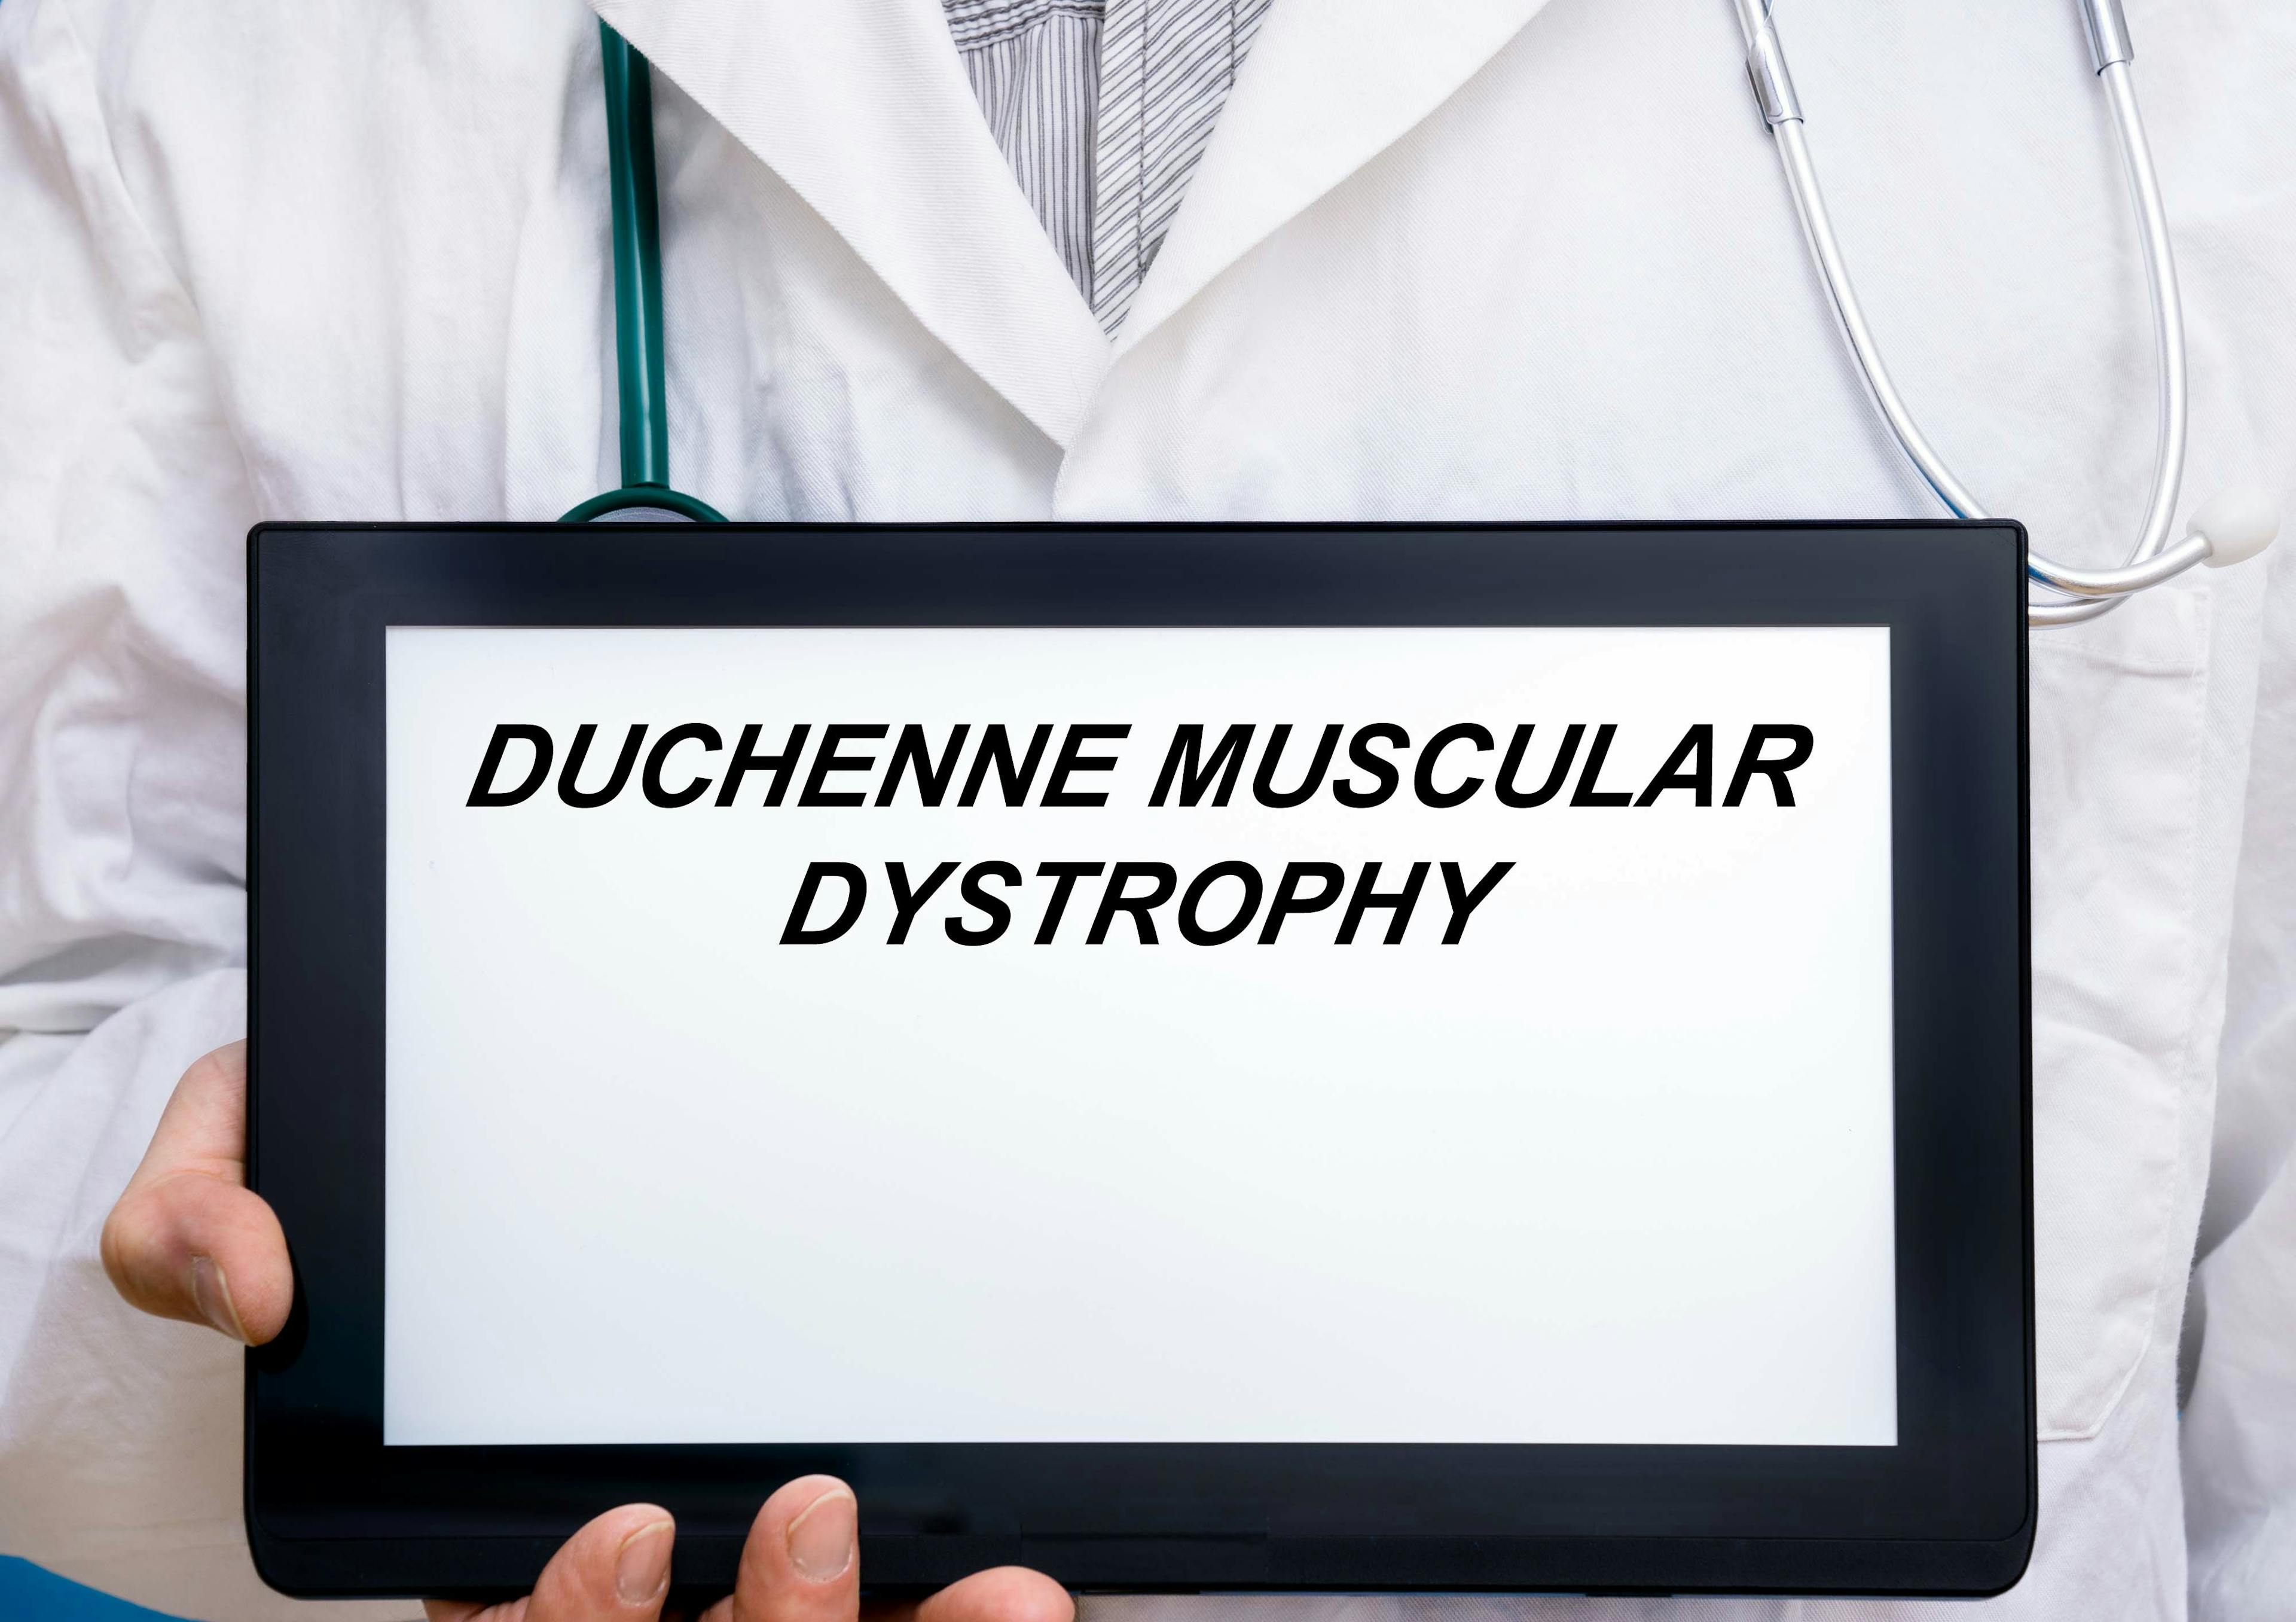 Access to novel therapies for Duchenne muscular dystrophy—Insights from expert treating physicians